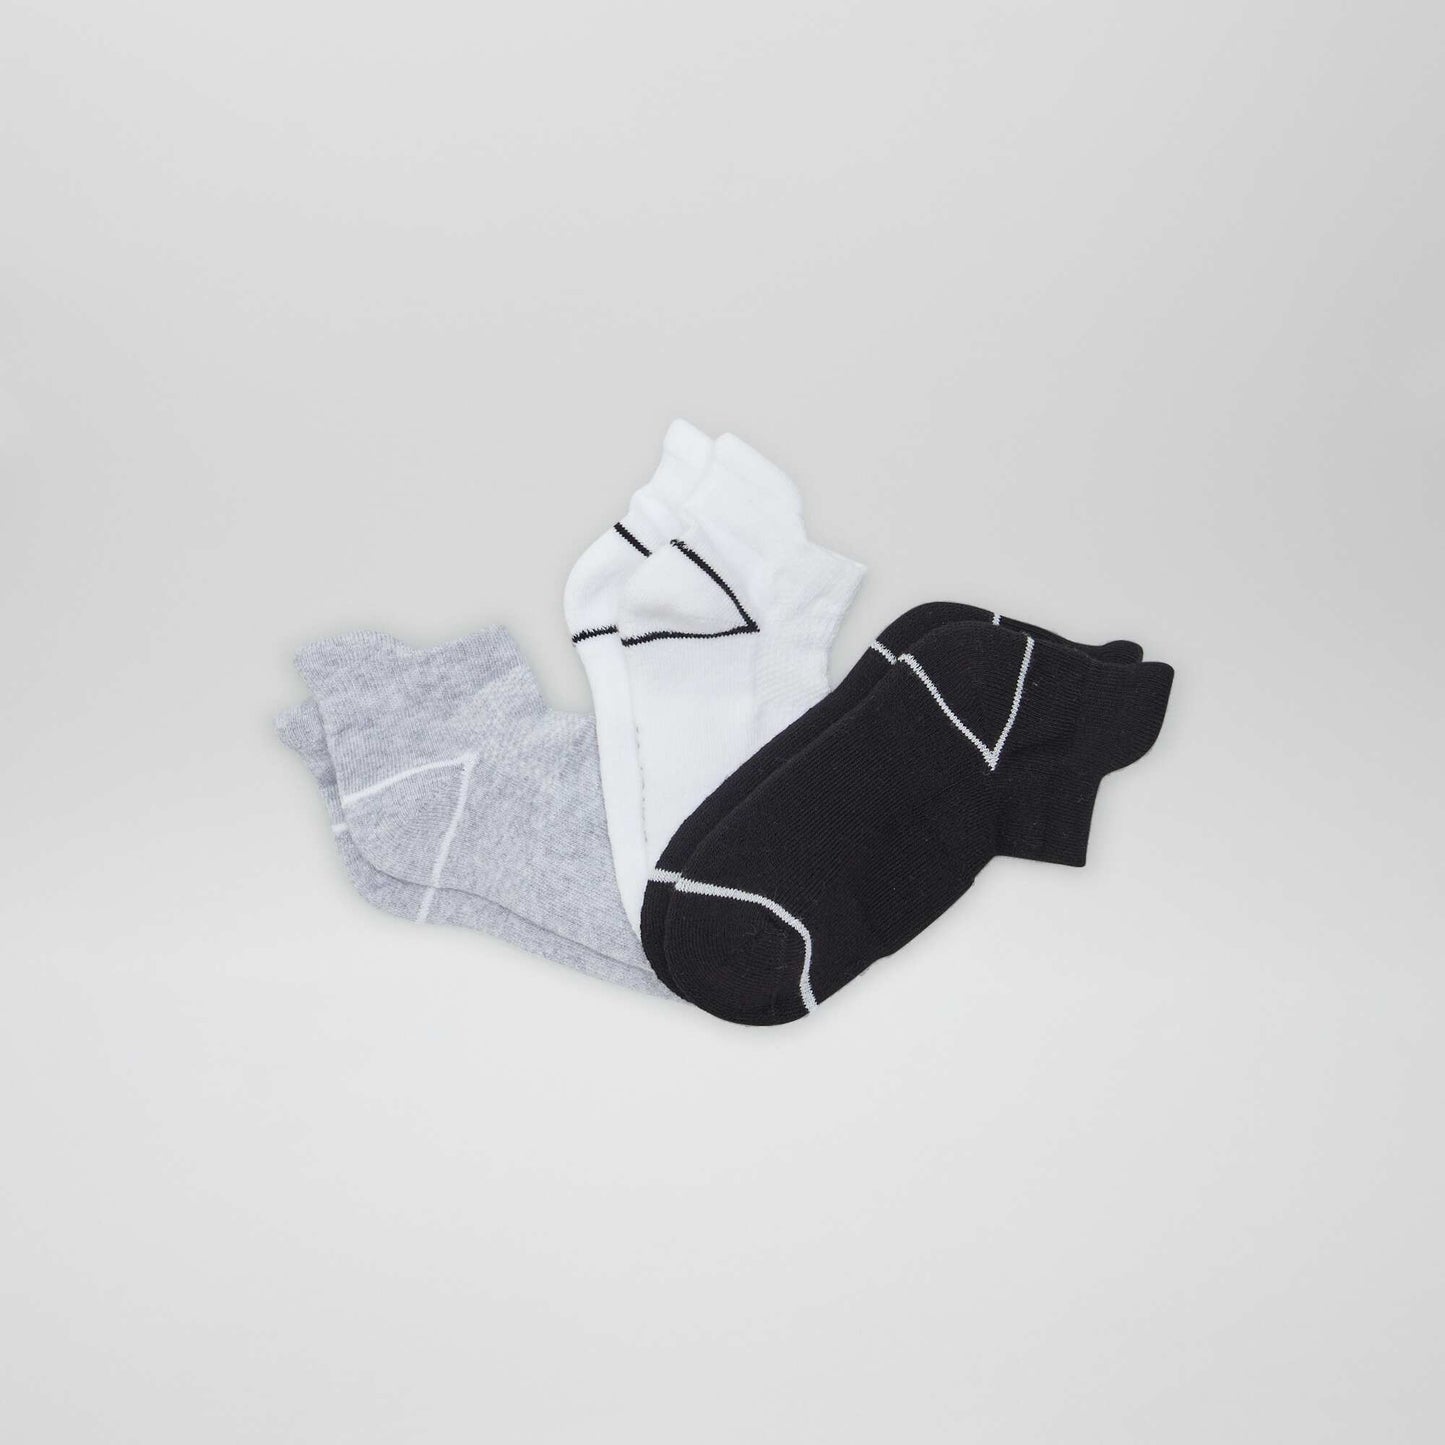 Pack of 3 pairs of invisible sports socks BLACK